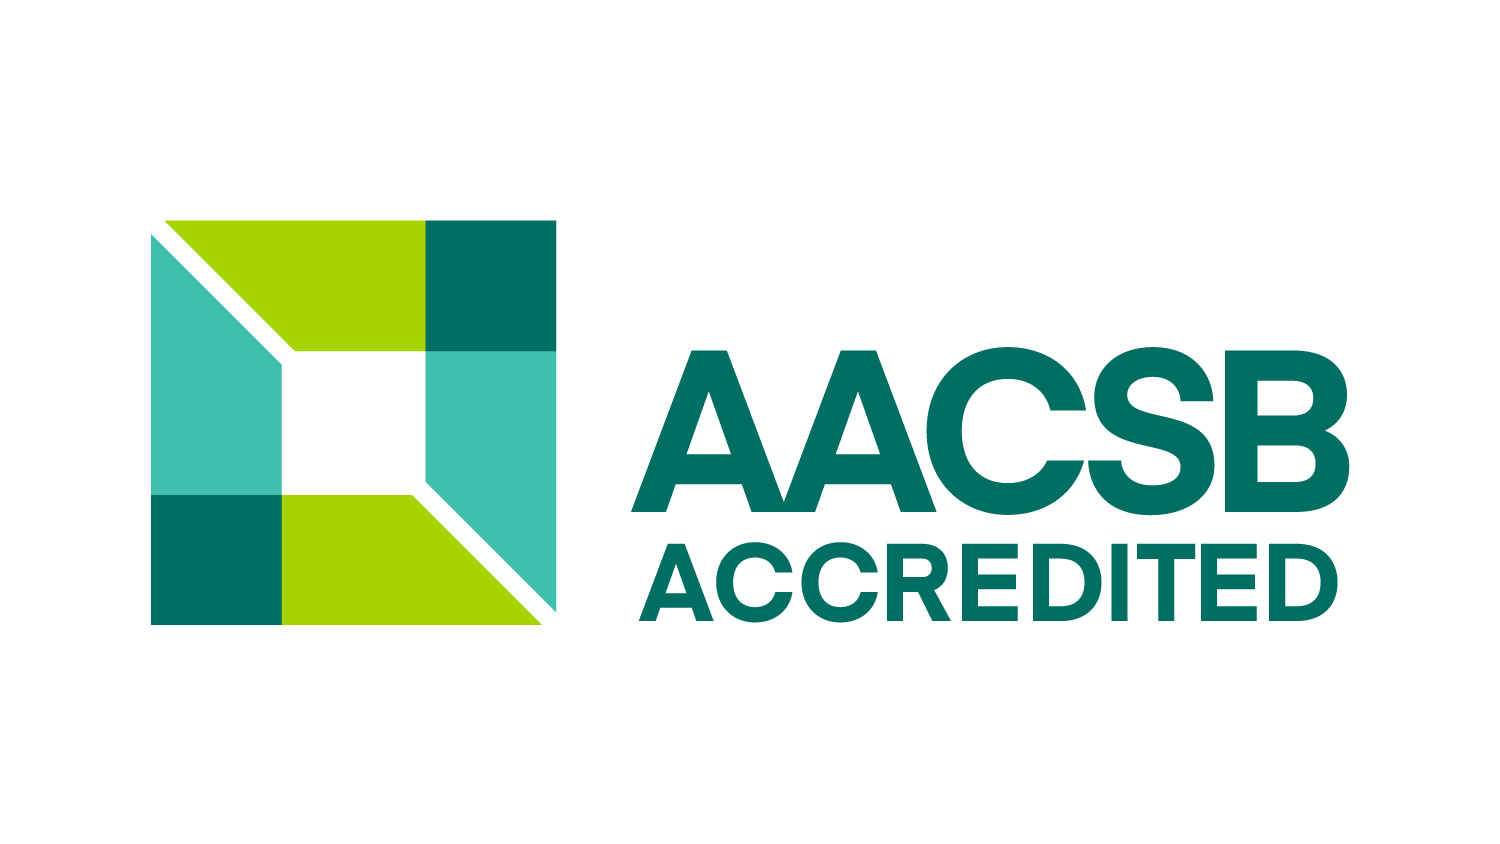 AACSB accrediation.